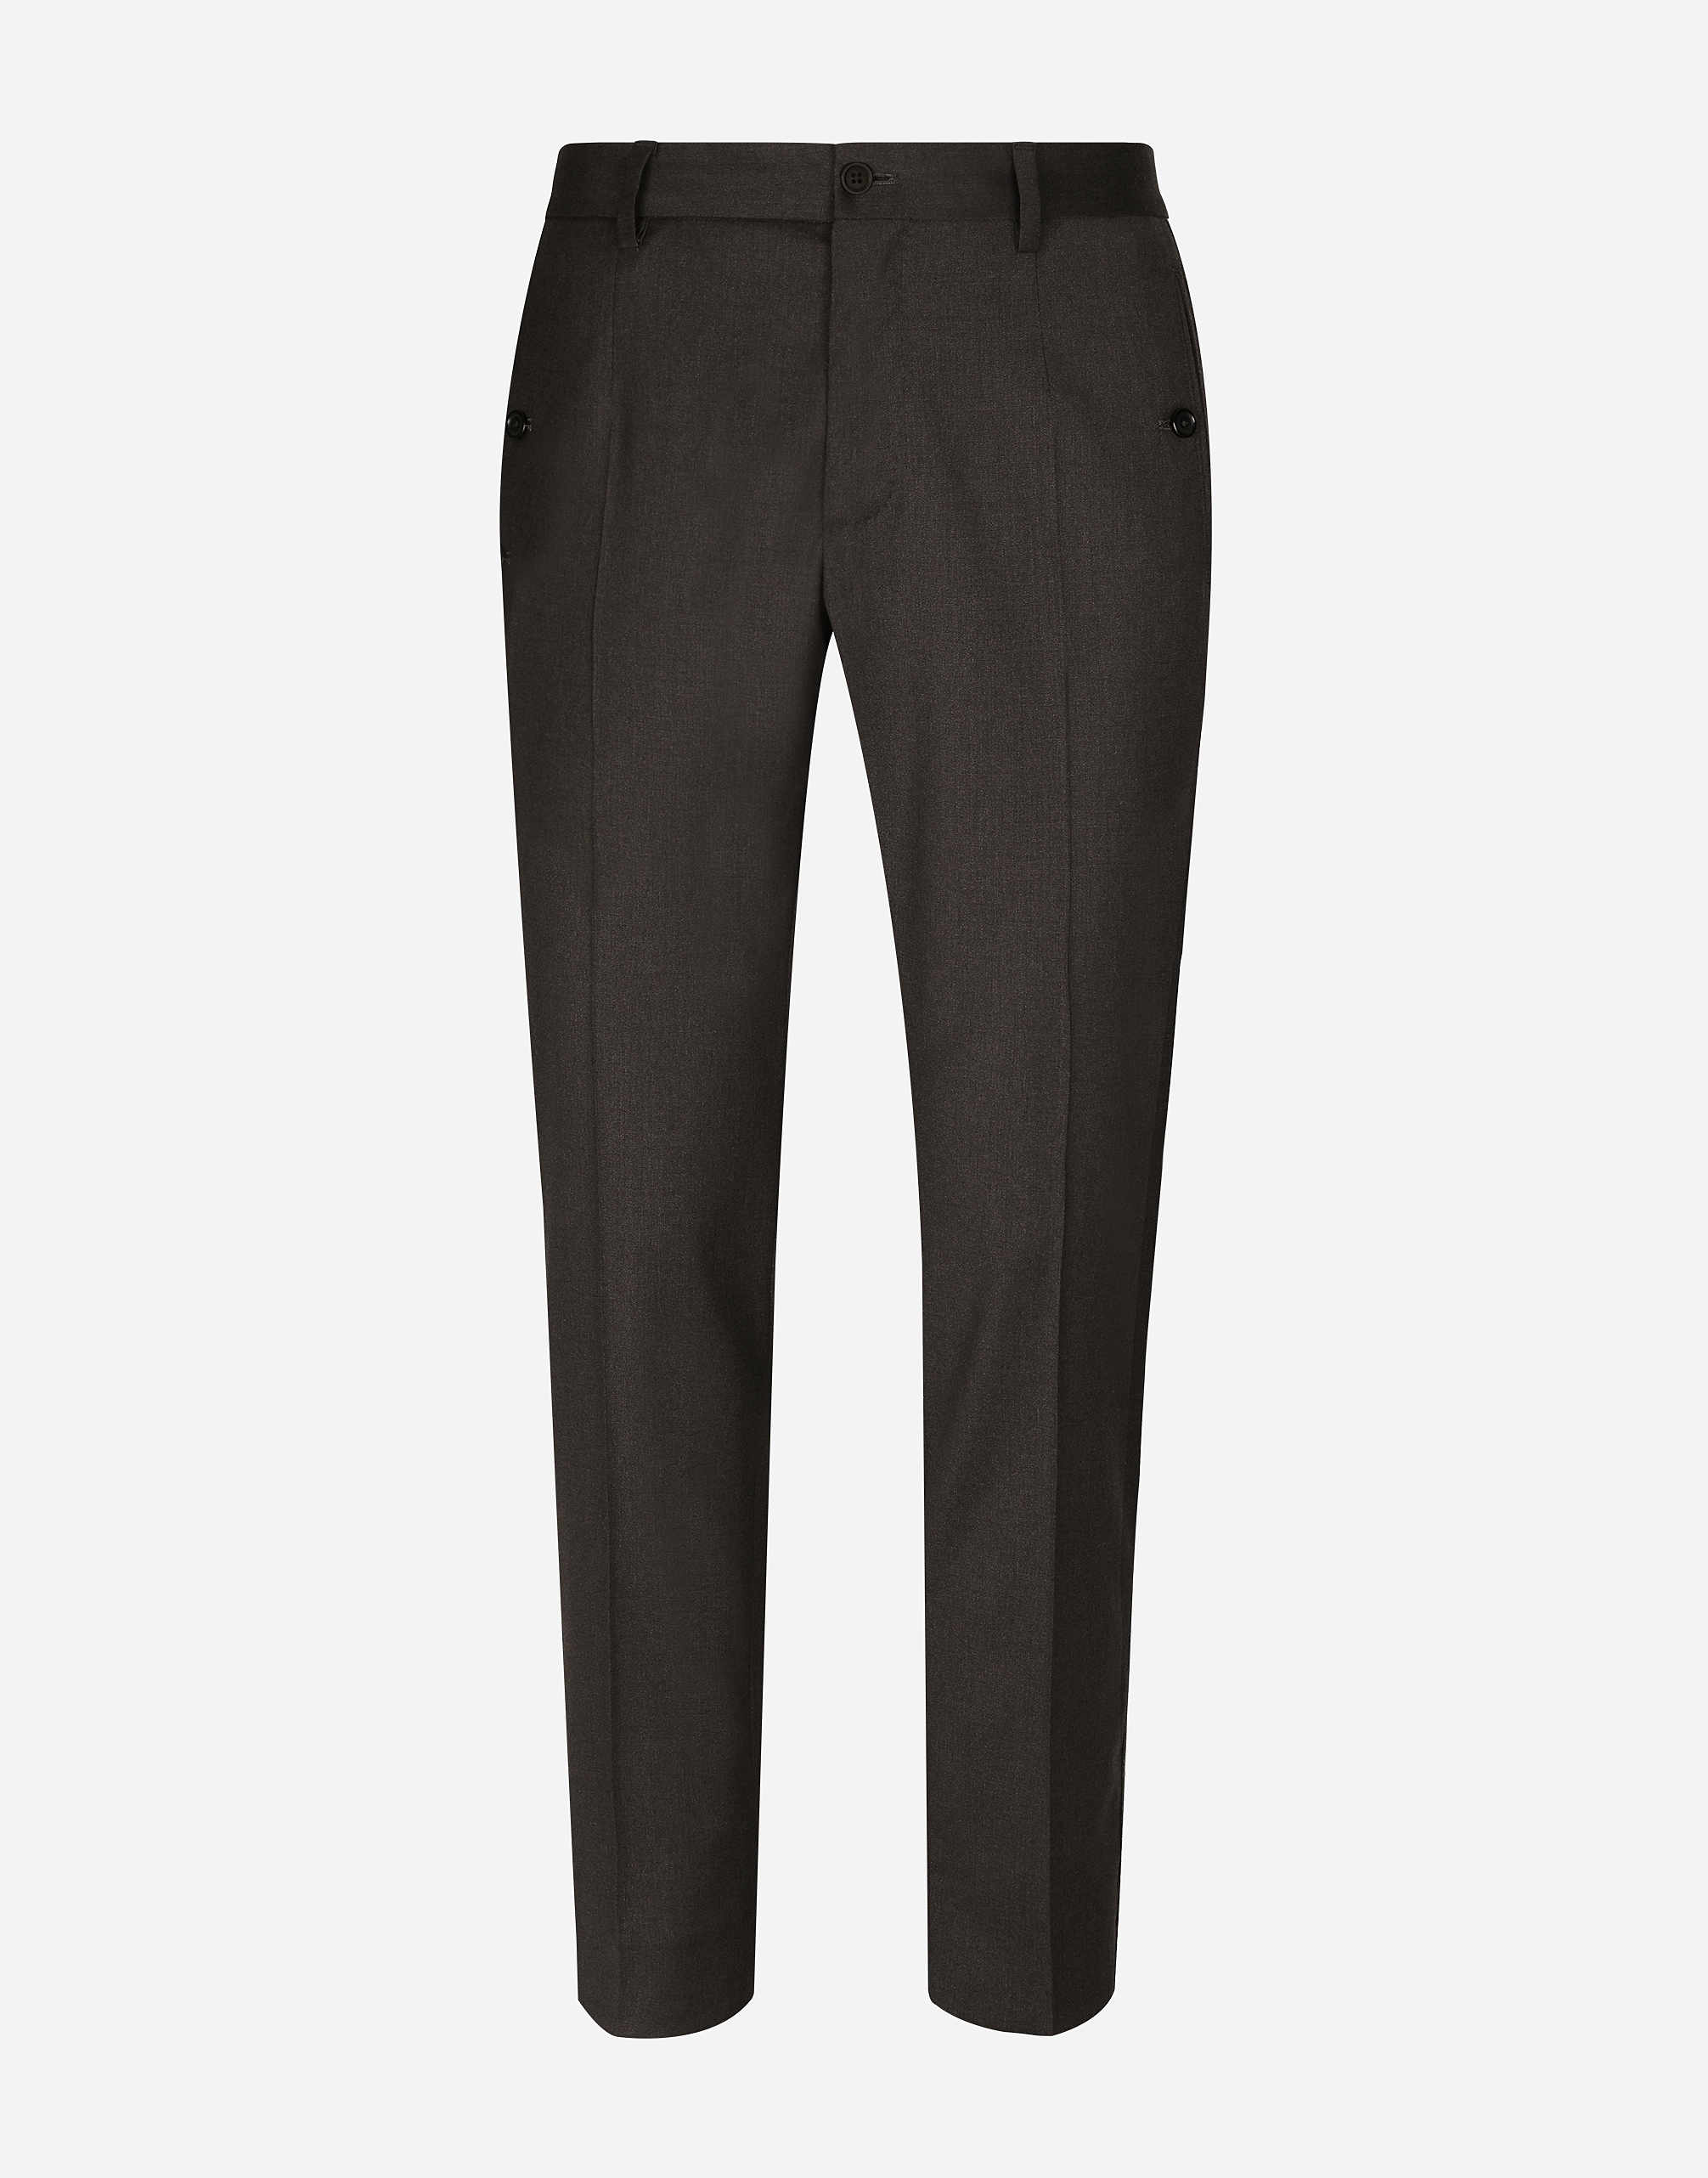 Dolce & Gabbana Stretch Wool Pants With Side Bands In Melange Grey